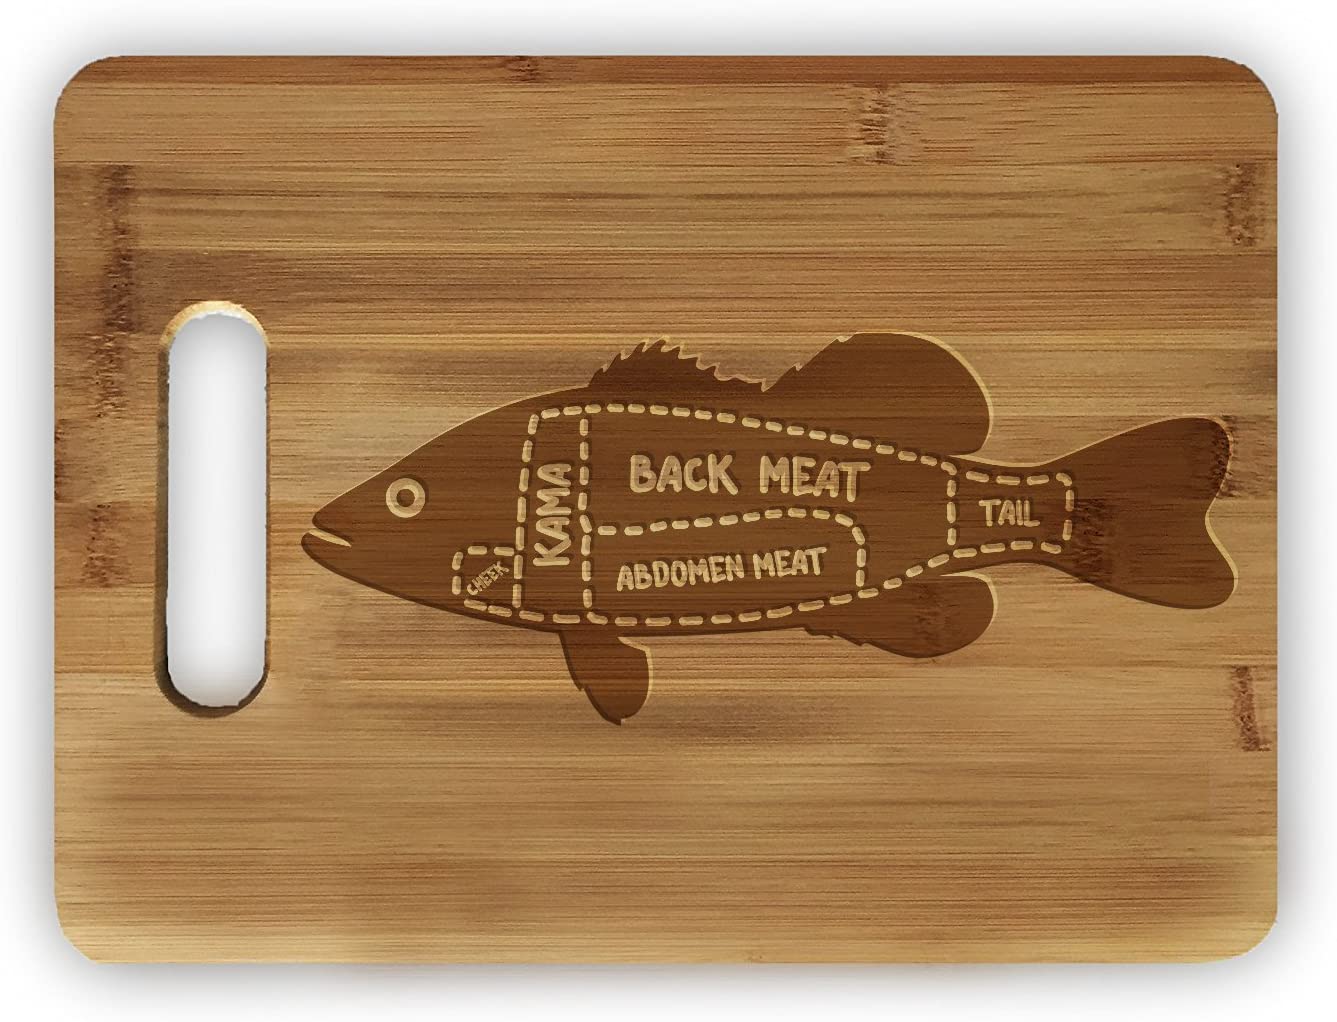 Engraved OR Color Printed Meat Map 8.5 x 11 Inch Bamboo Wood Cutting Board